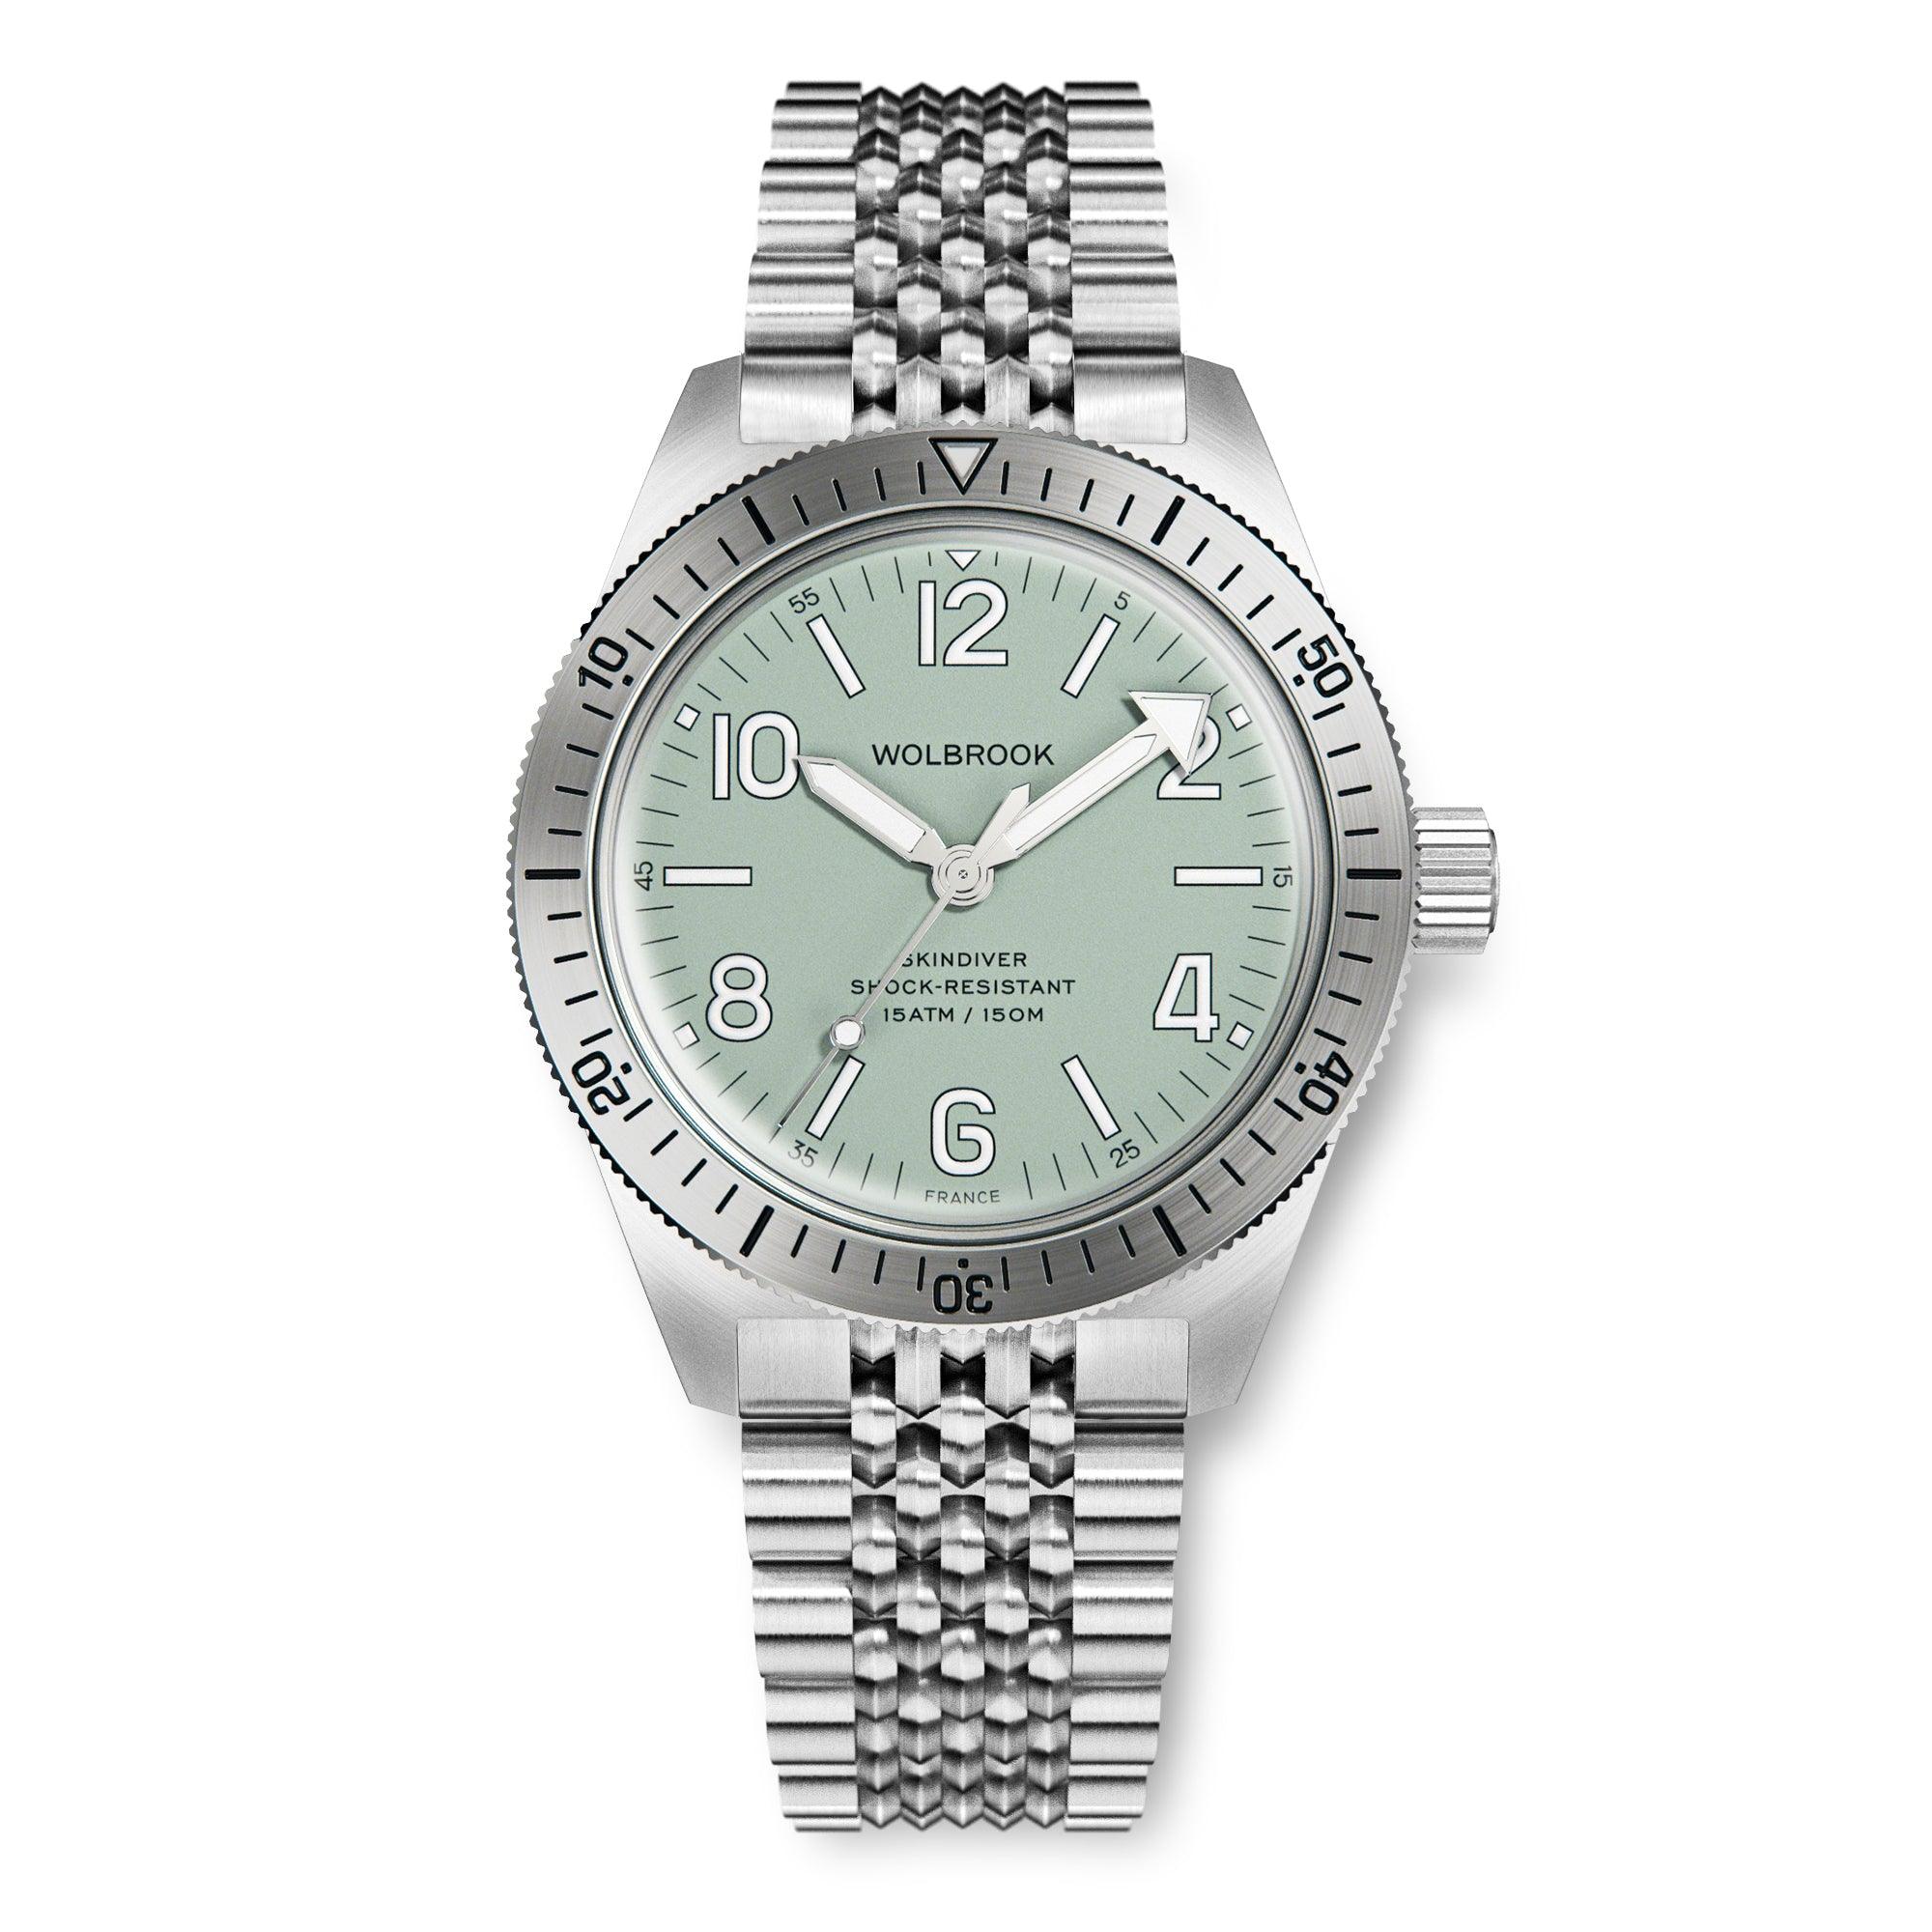 Skindiver Automatic Watch – Celadon Green - Wolbrook Watches